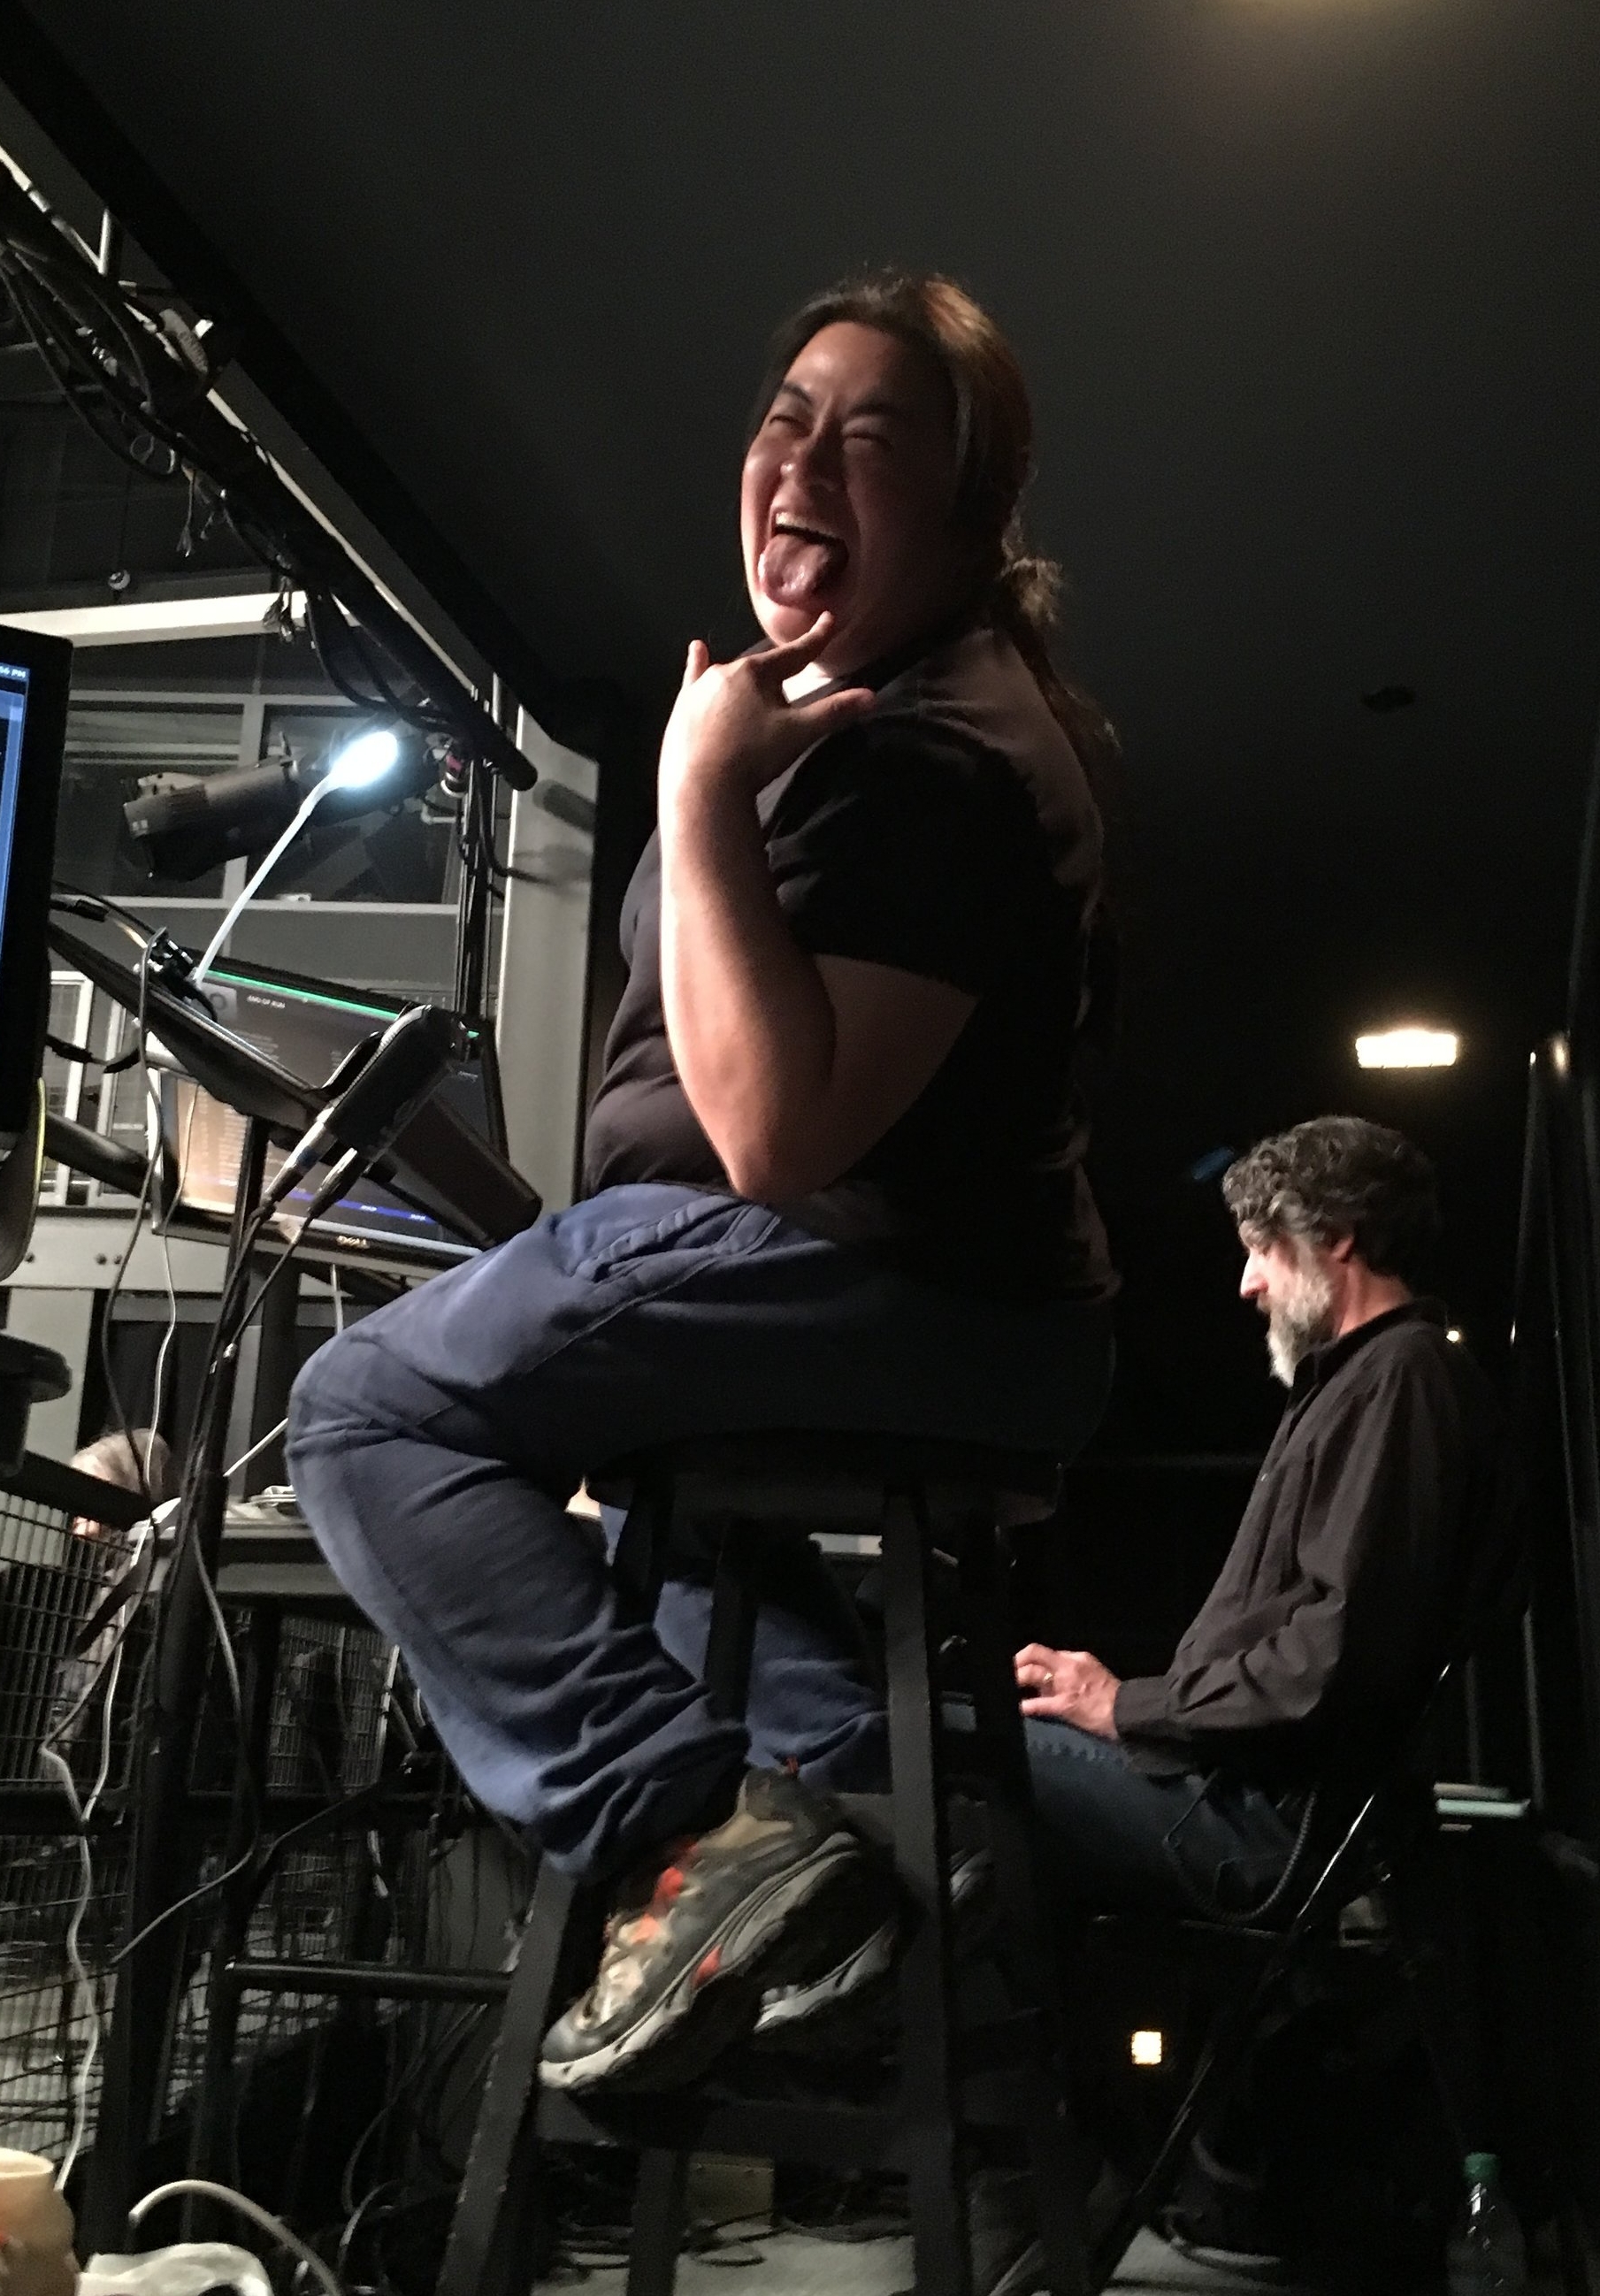 Valerie Oliveiro, Stage Manager